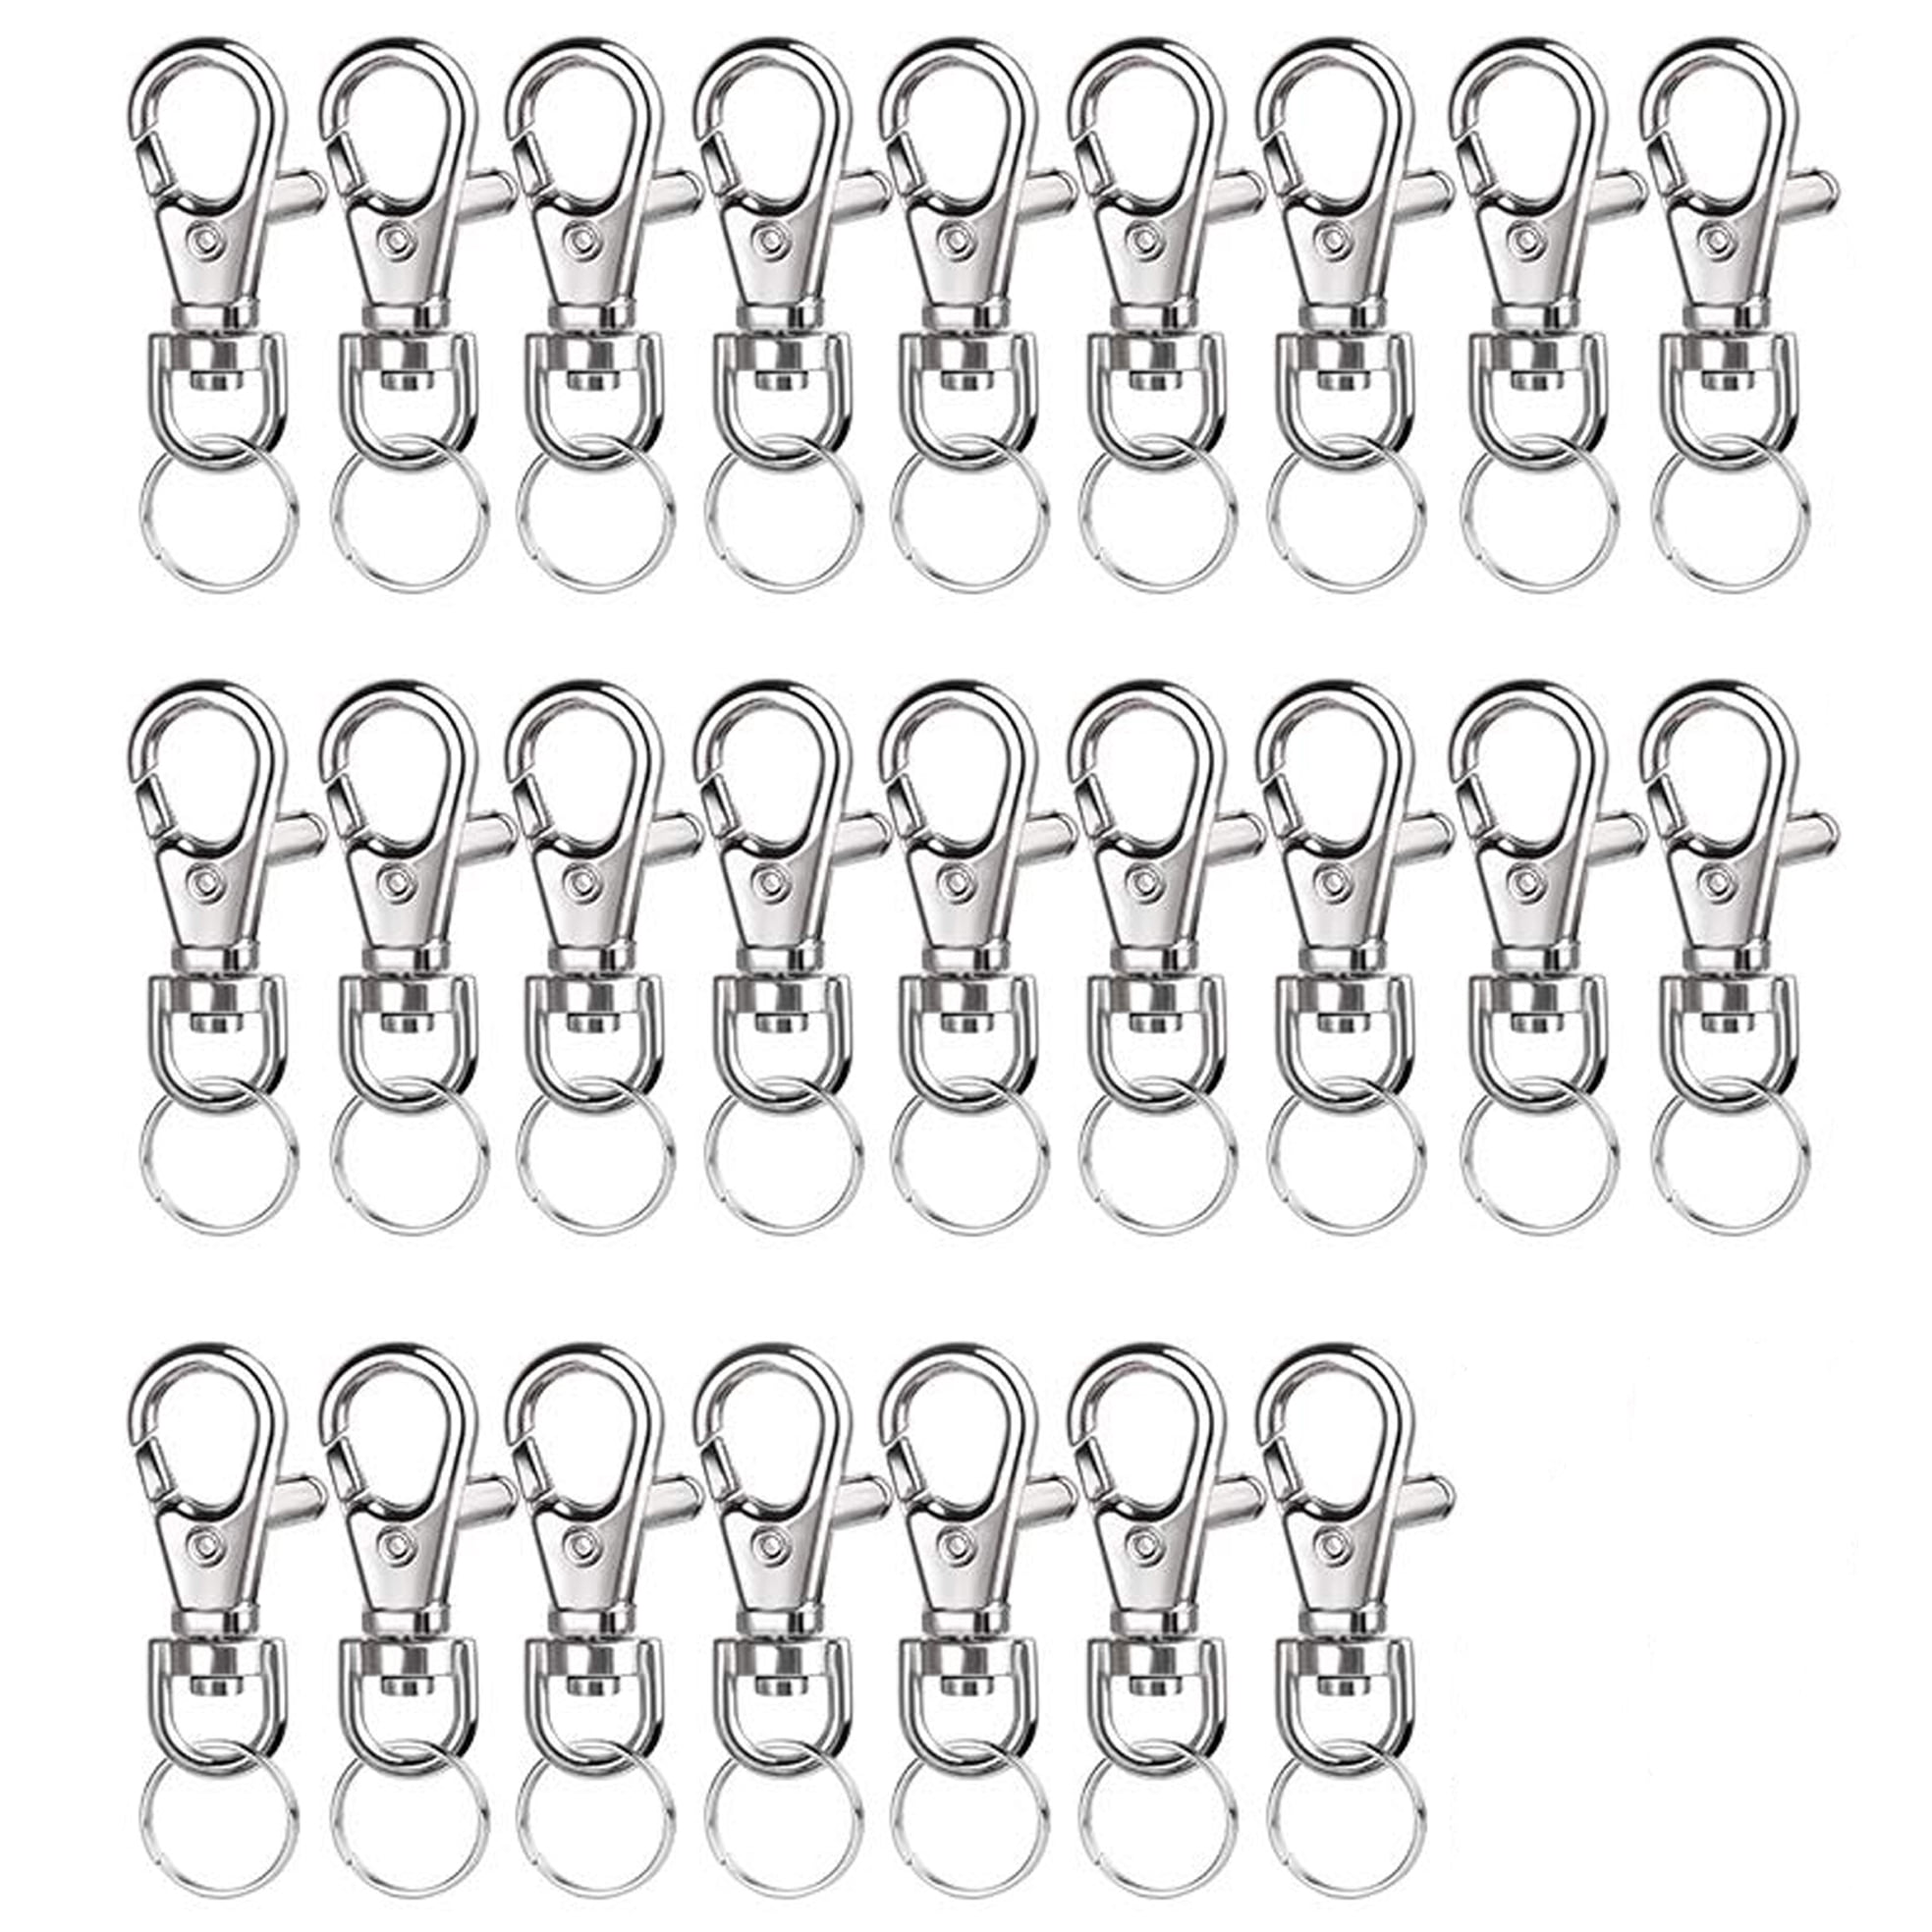 Bulk 100 Pack - Premium Metal Lobster Claw Clasp Hook Craft Findings - 1.5  Inch Clip with Trigger Snap and Round Eye Swivel D Ring by Specialist ID  (Silver) 